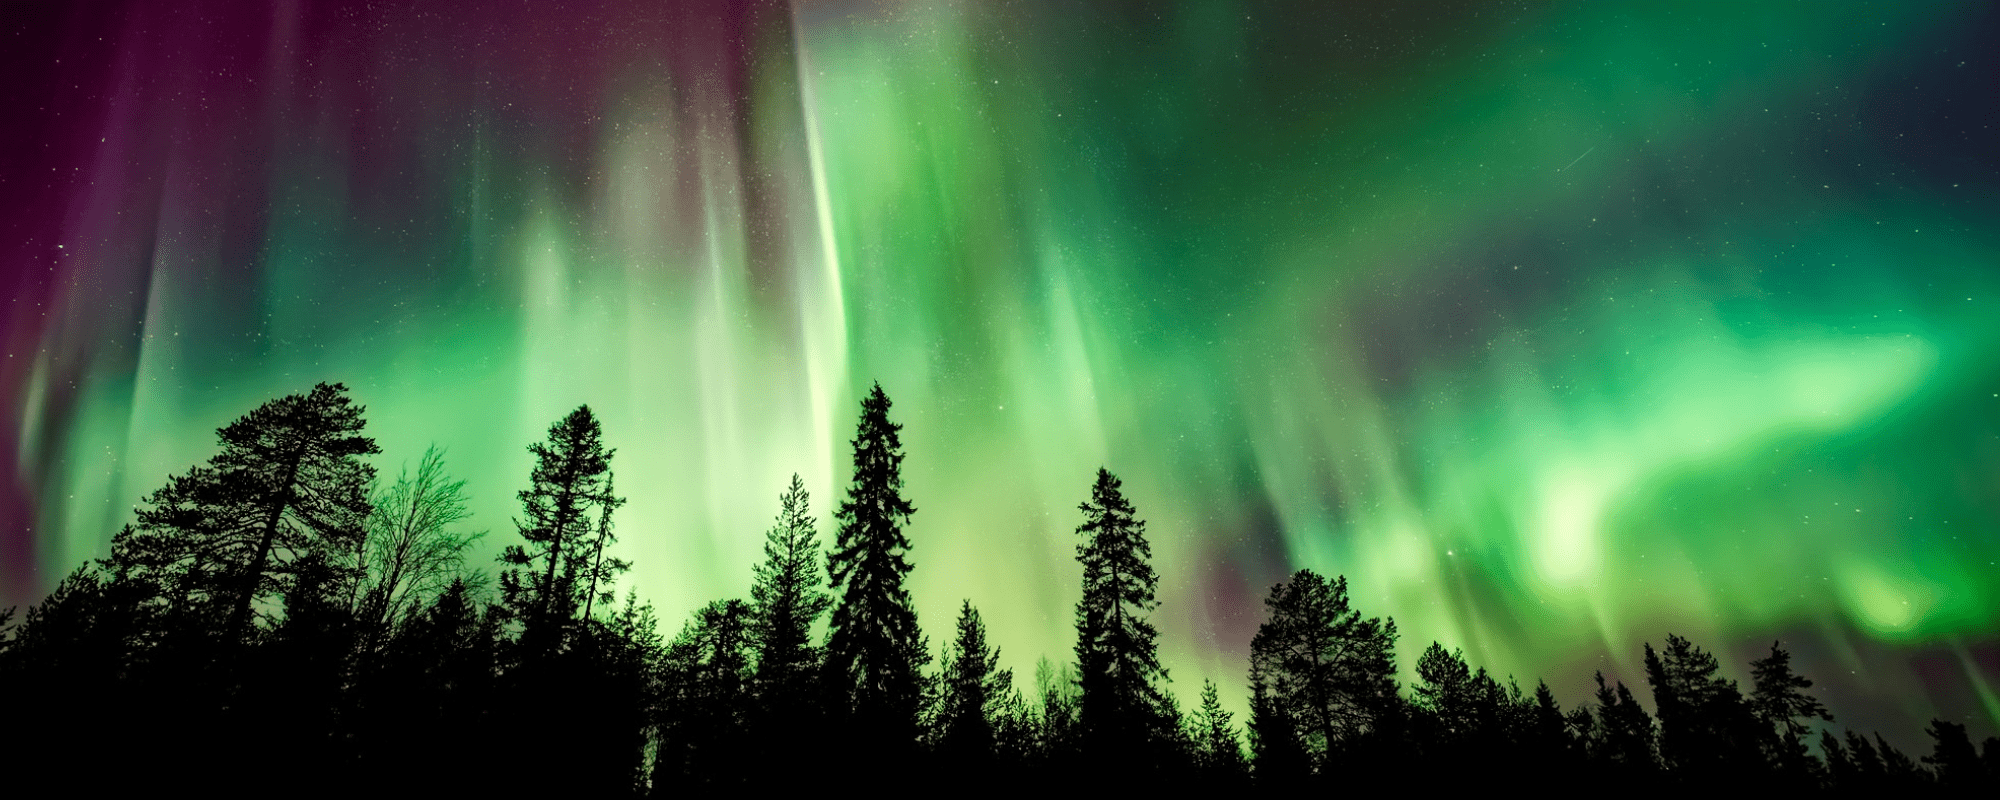 northern lights forest scenery